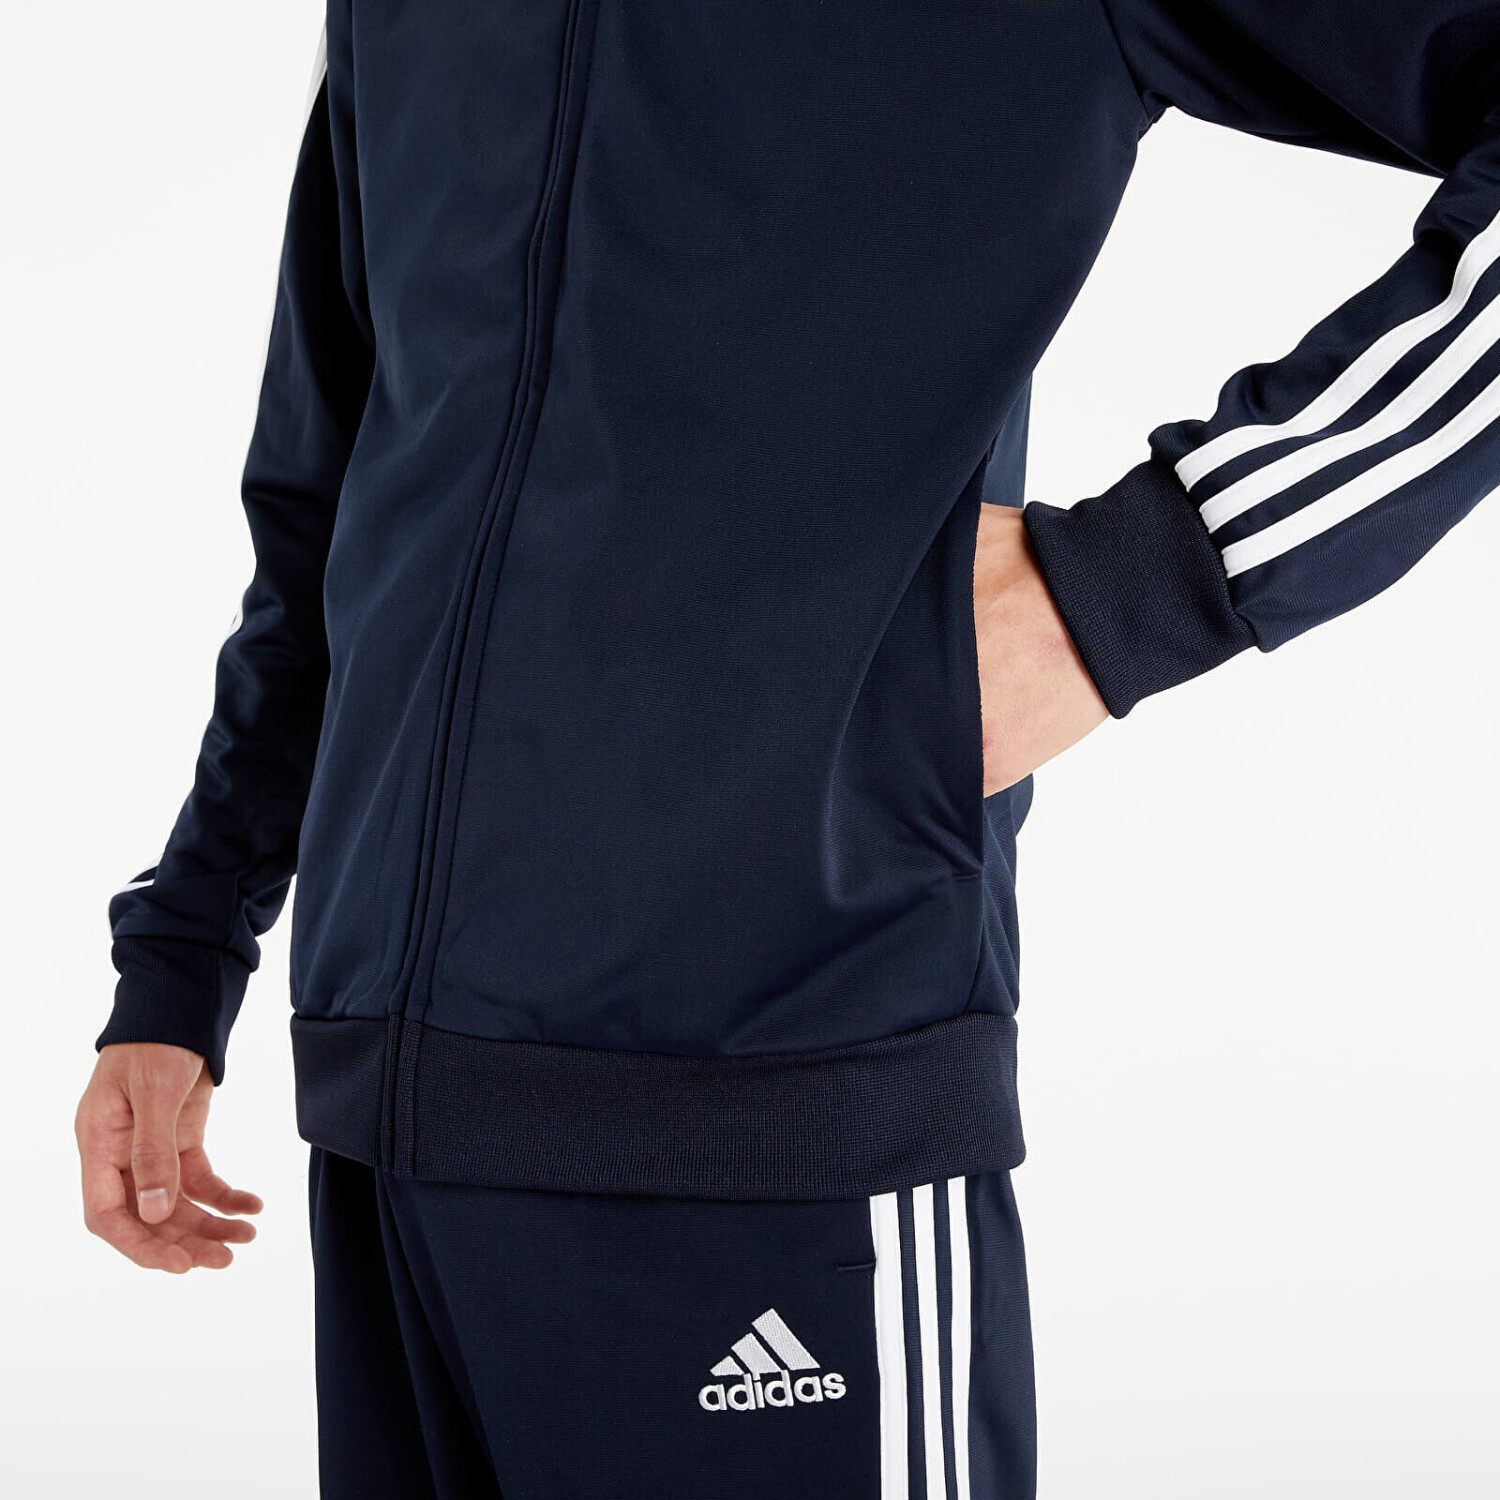 Buy Adidas Primegreen Essentials 3-Stripes Track Suit dark blue from £44.90  (Today) – Best Deals on